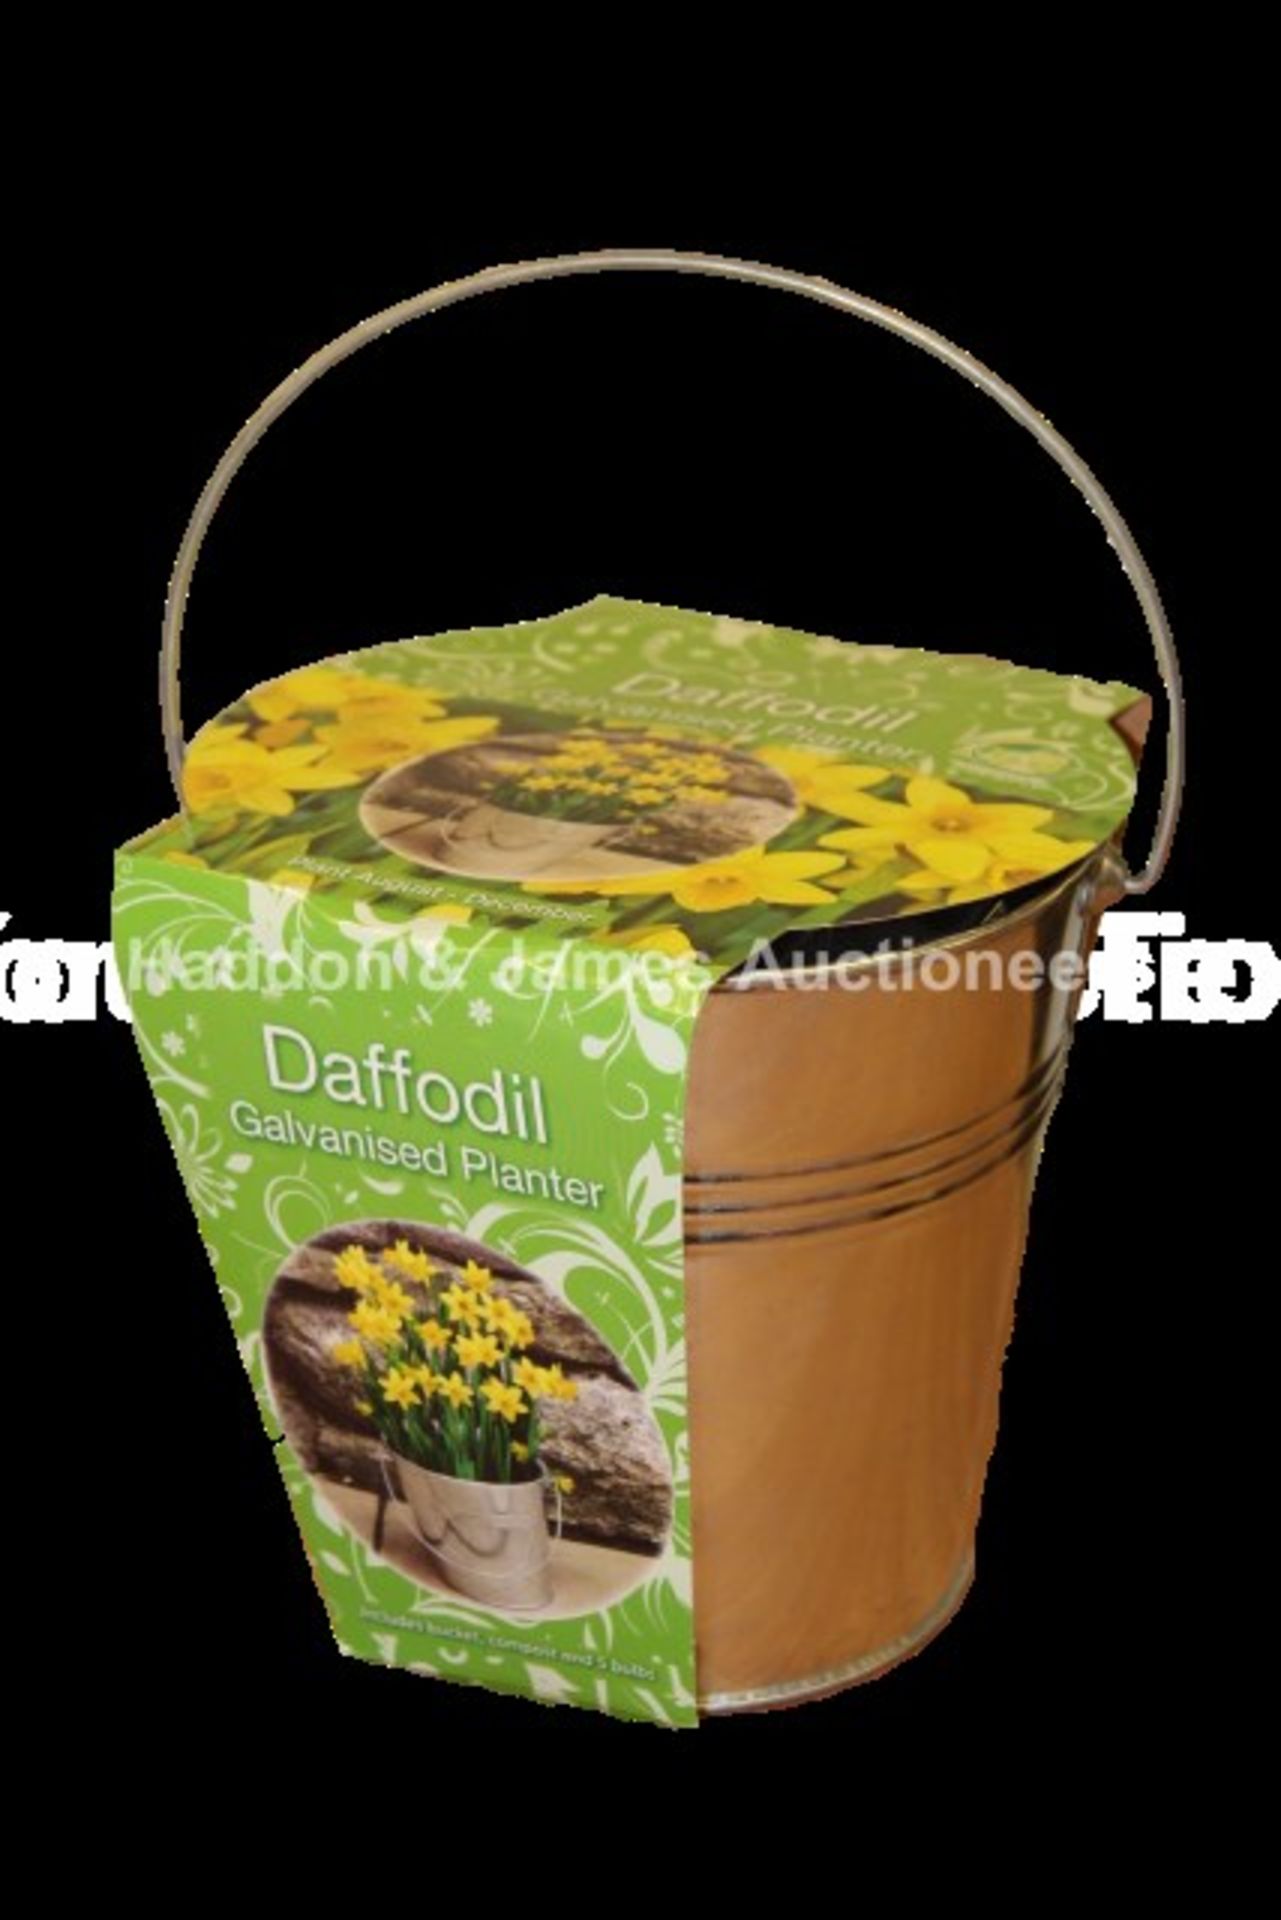 V Brand New Daffodil 5 Bulb Galvanised Bucket Gift Set Including 5 Bulbs, Bucket Planter And Compost